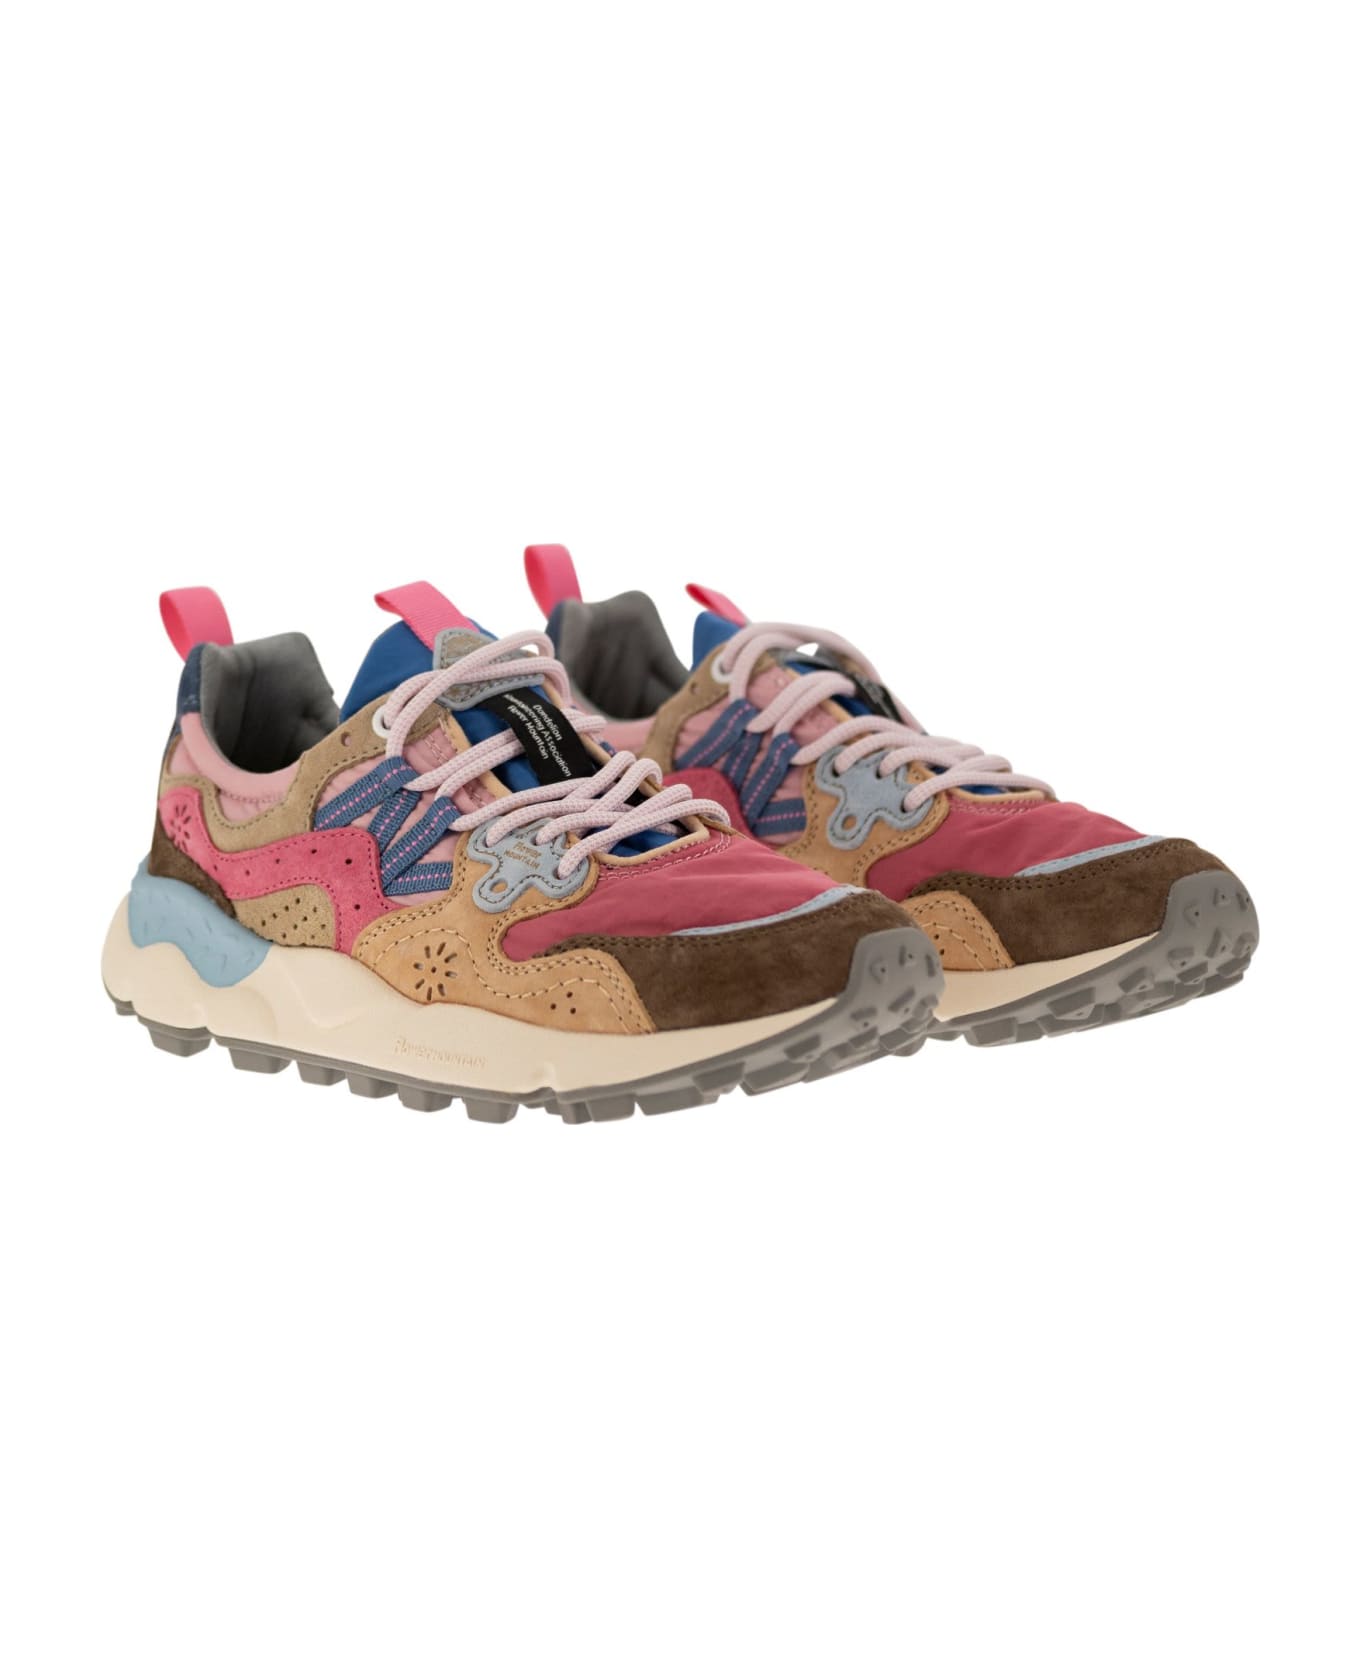 Flower Mountain Yamano 3 - Sneakers In Suede And Technical Fabric - Pink スニーカー